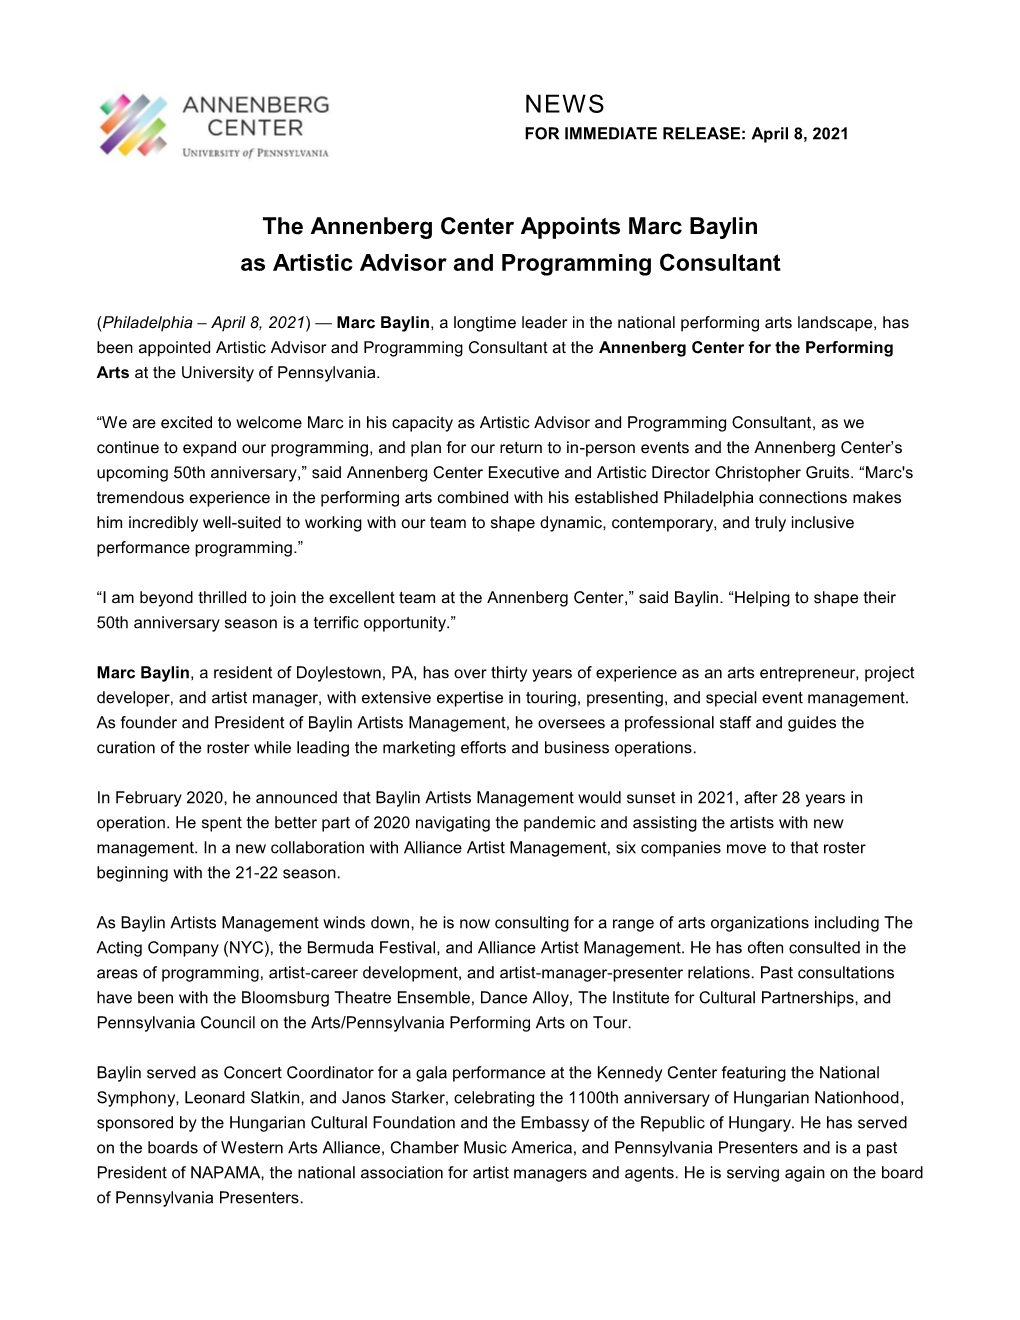 The Annenberg Center Appoints Marc Baylin As Artistic Advisor and Programming Consultant